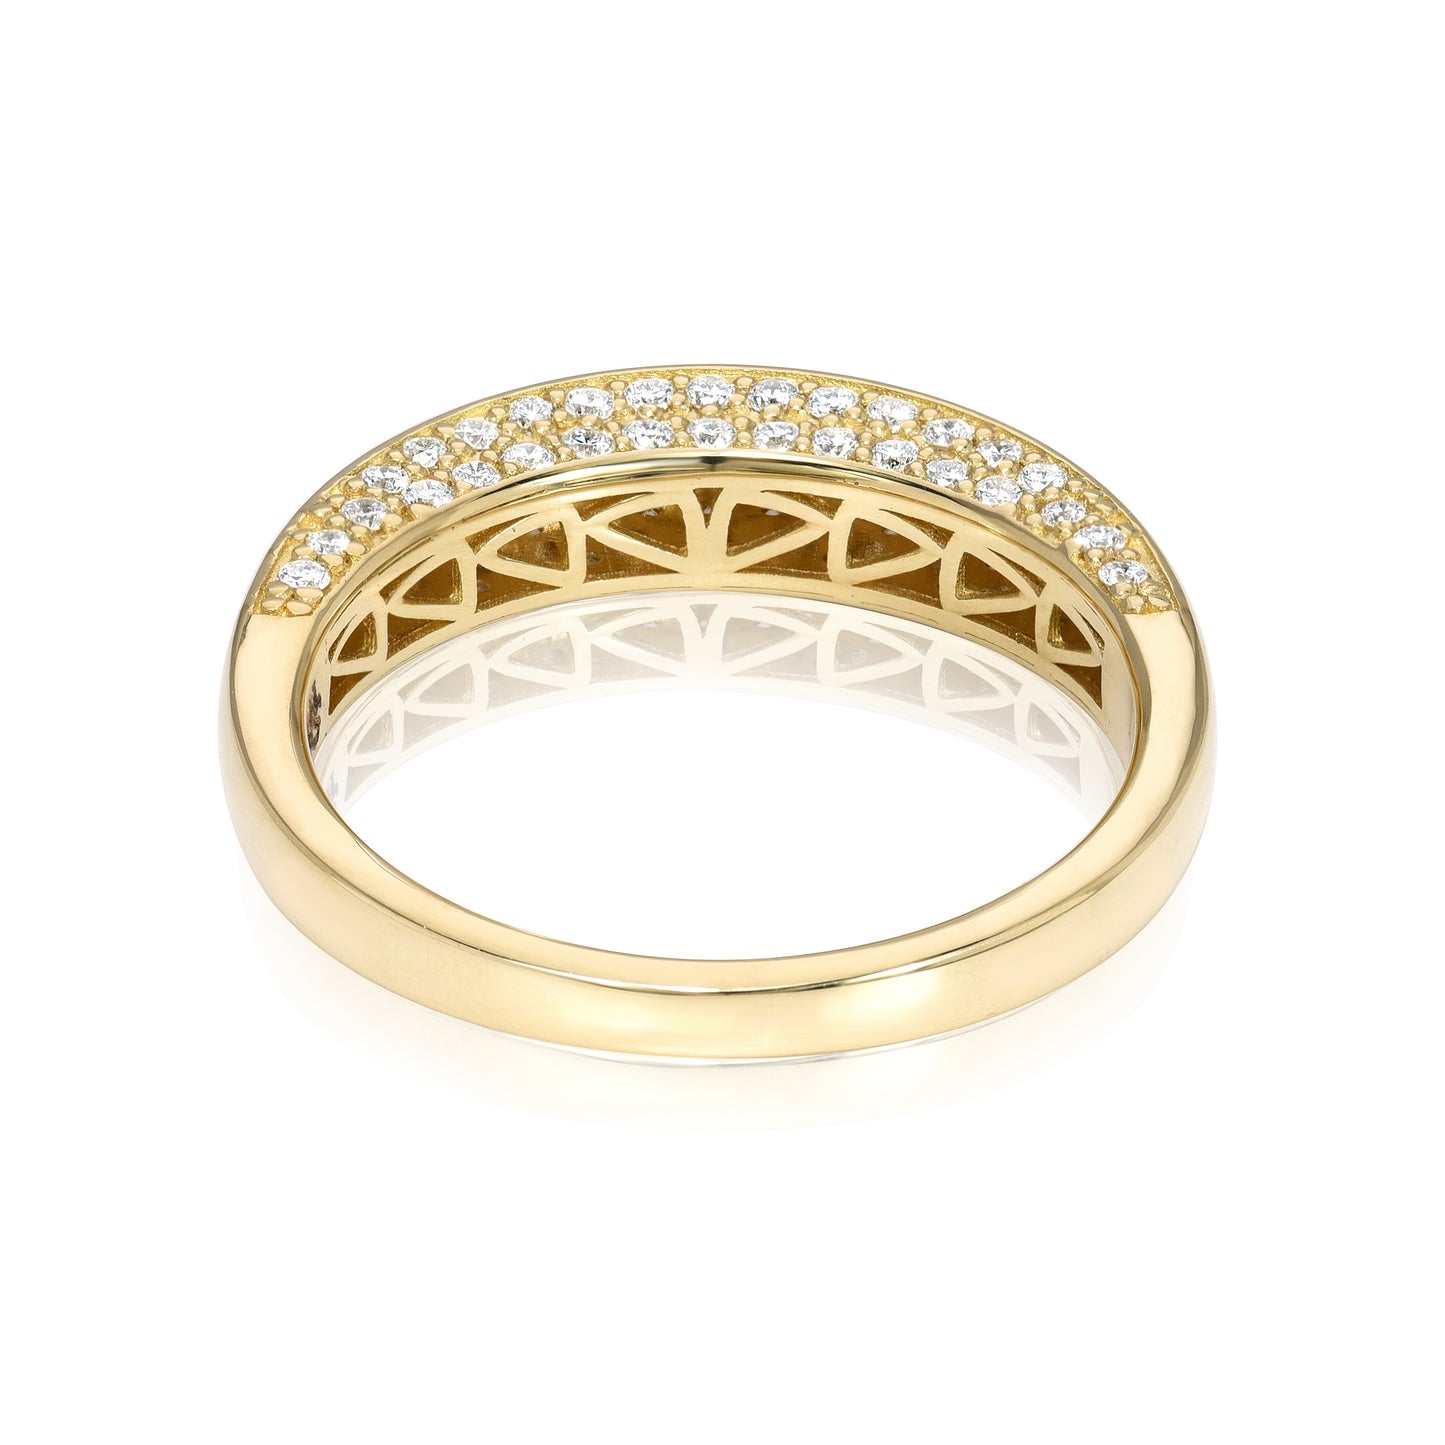 Arc Ring with Champagne Diamonds